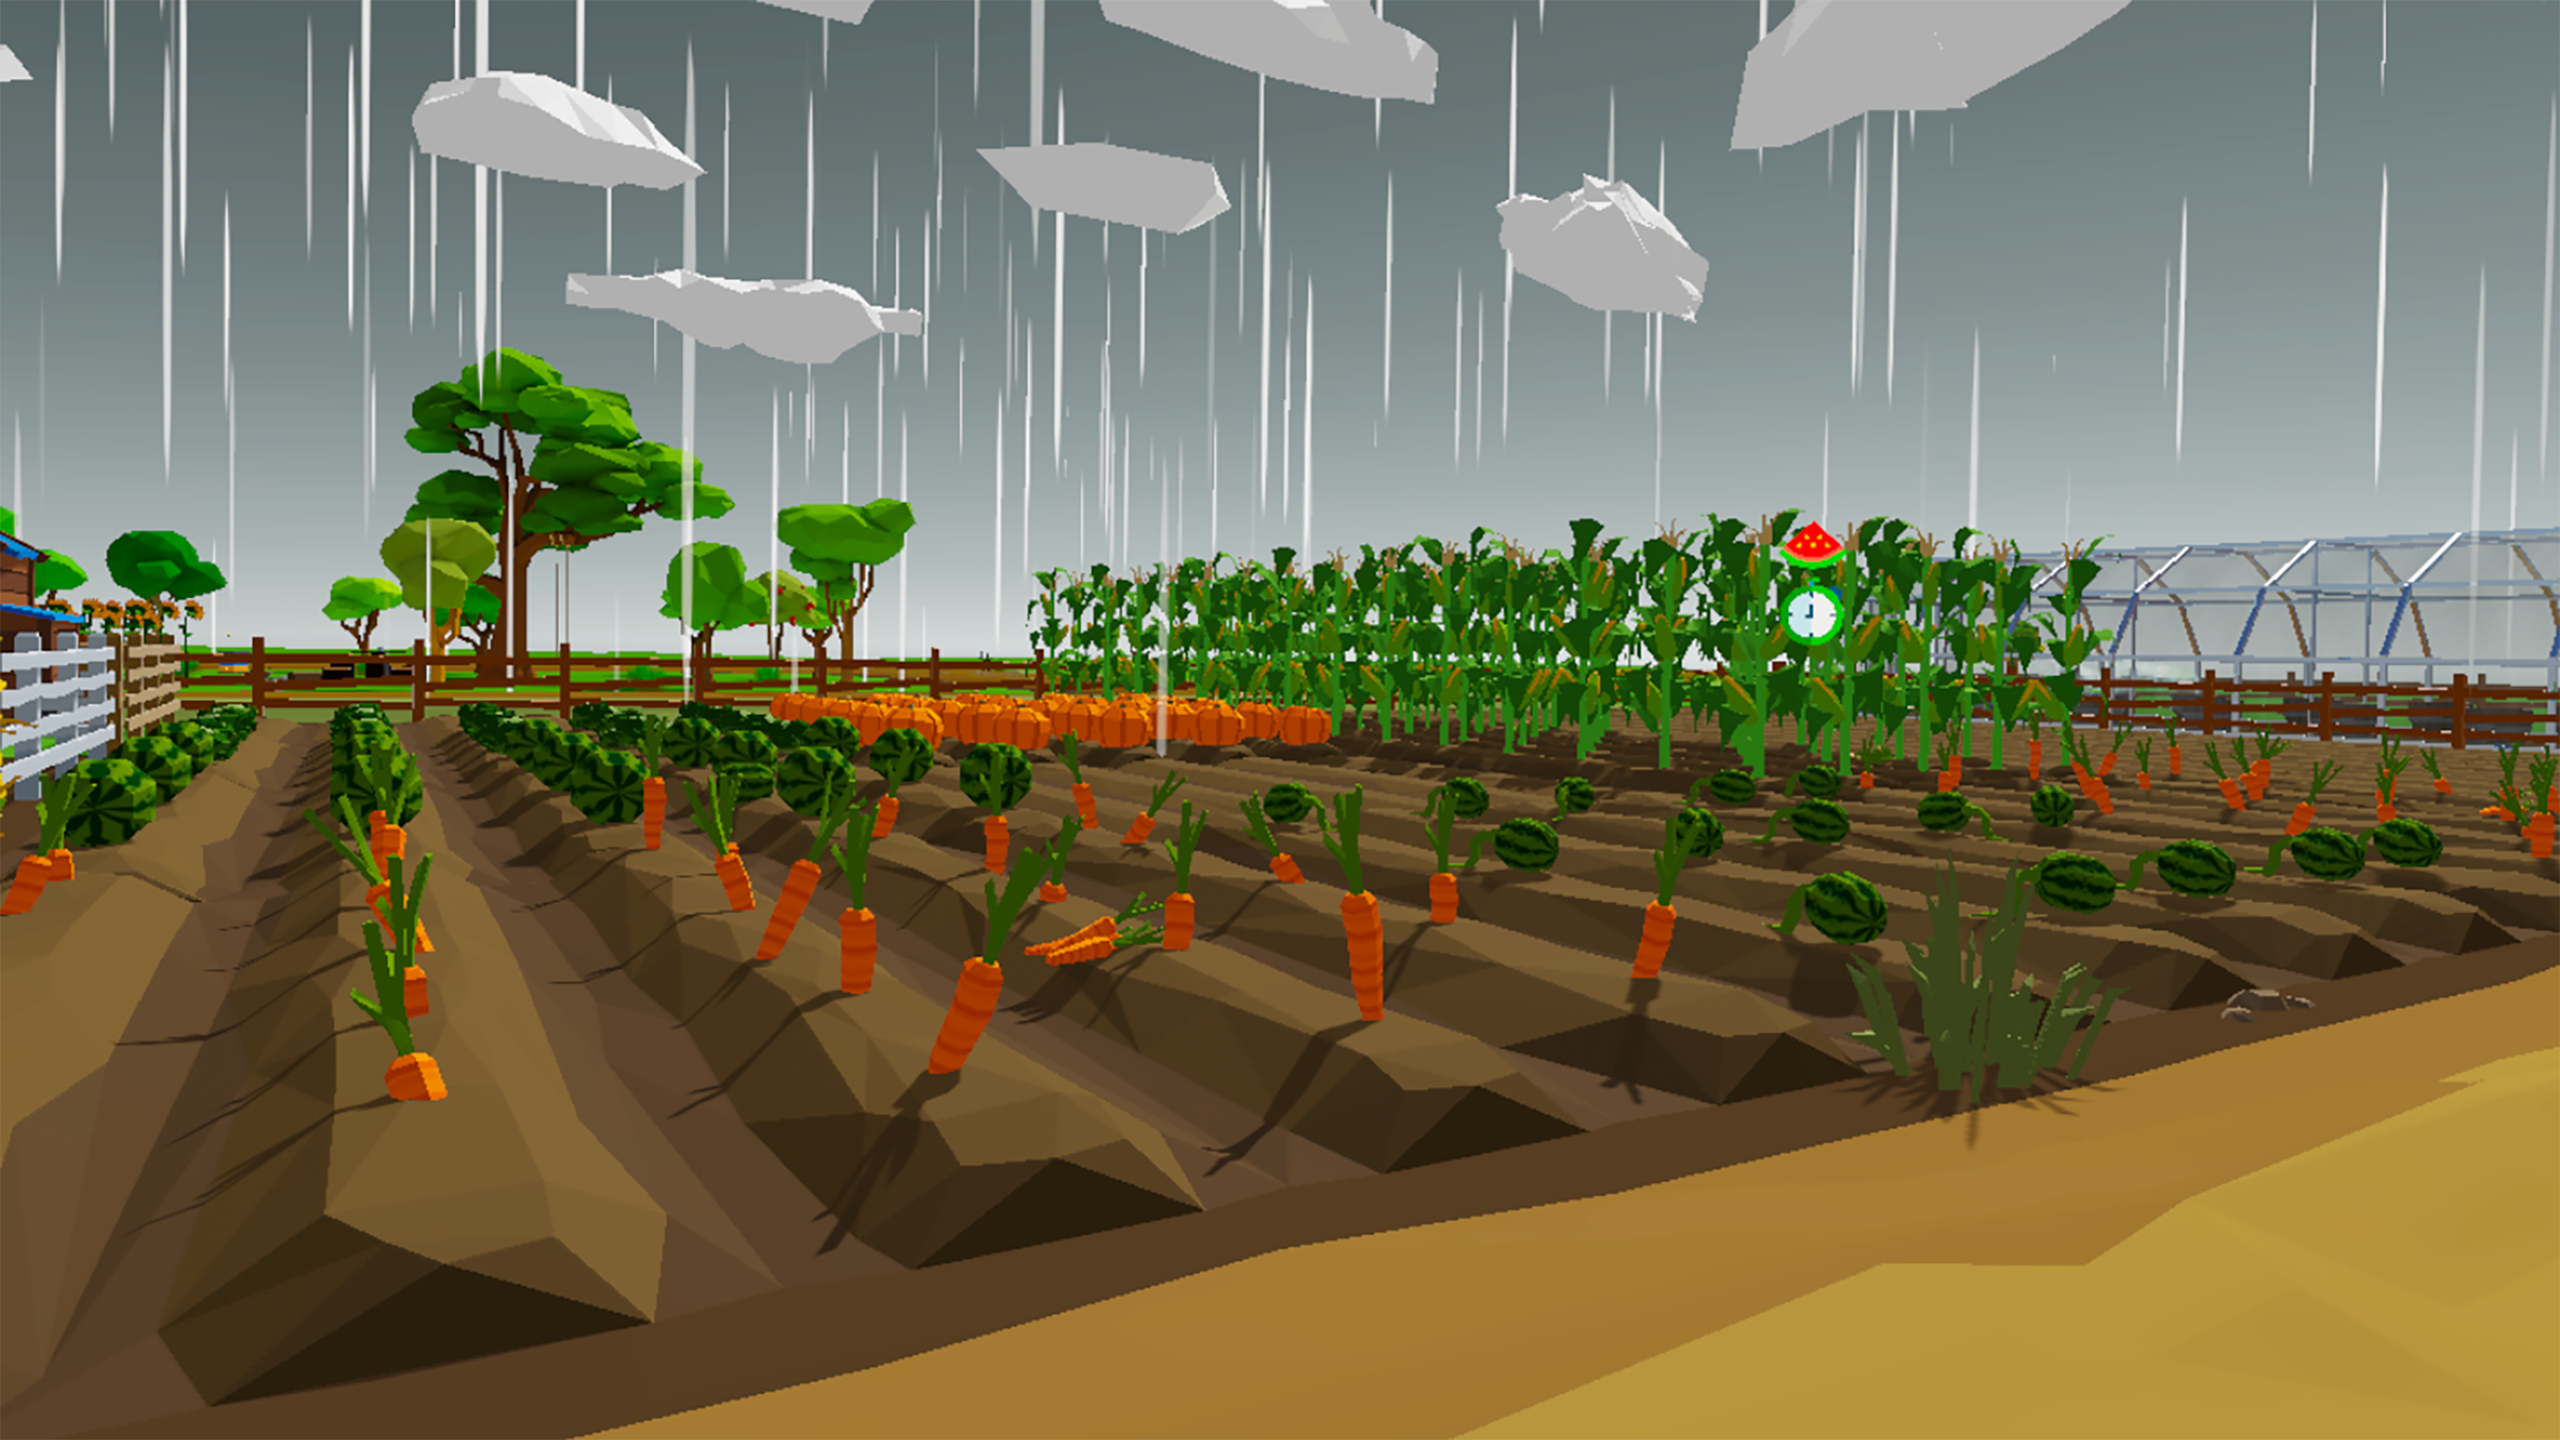 Image of crops in the rain